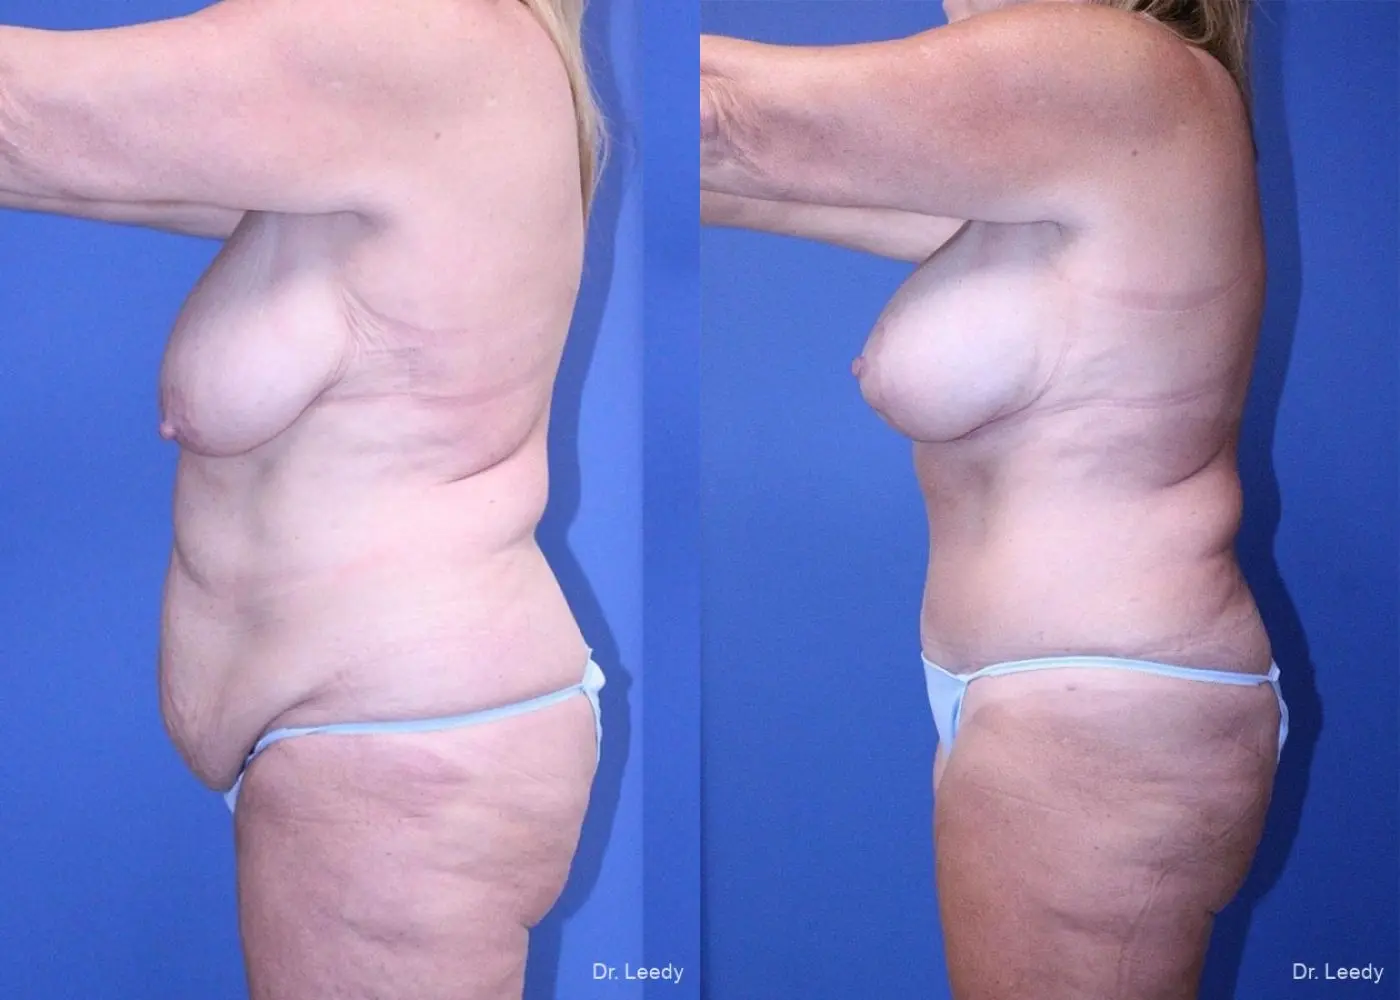 Surgery After Weight Loss: Patient 6 - Before and After 5